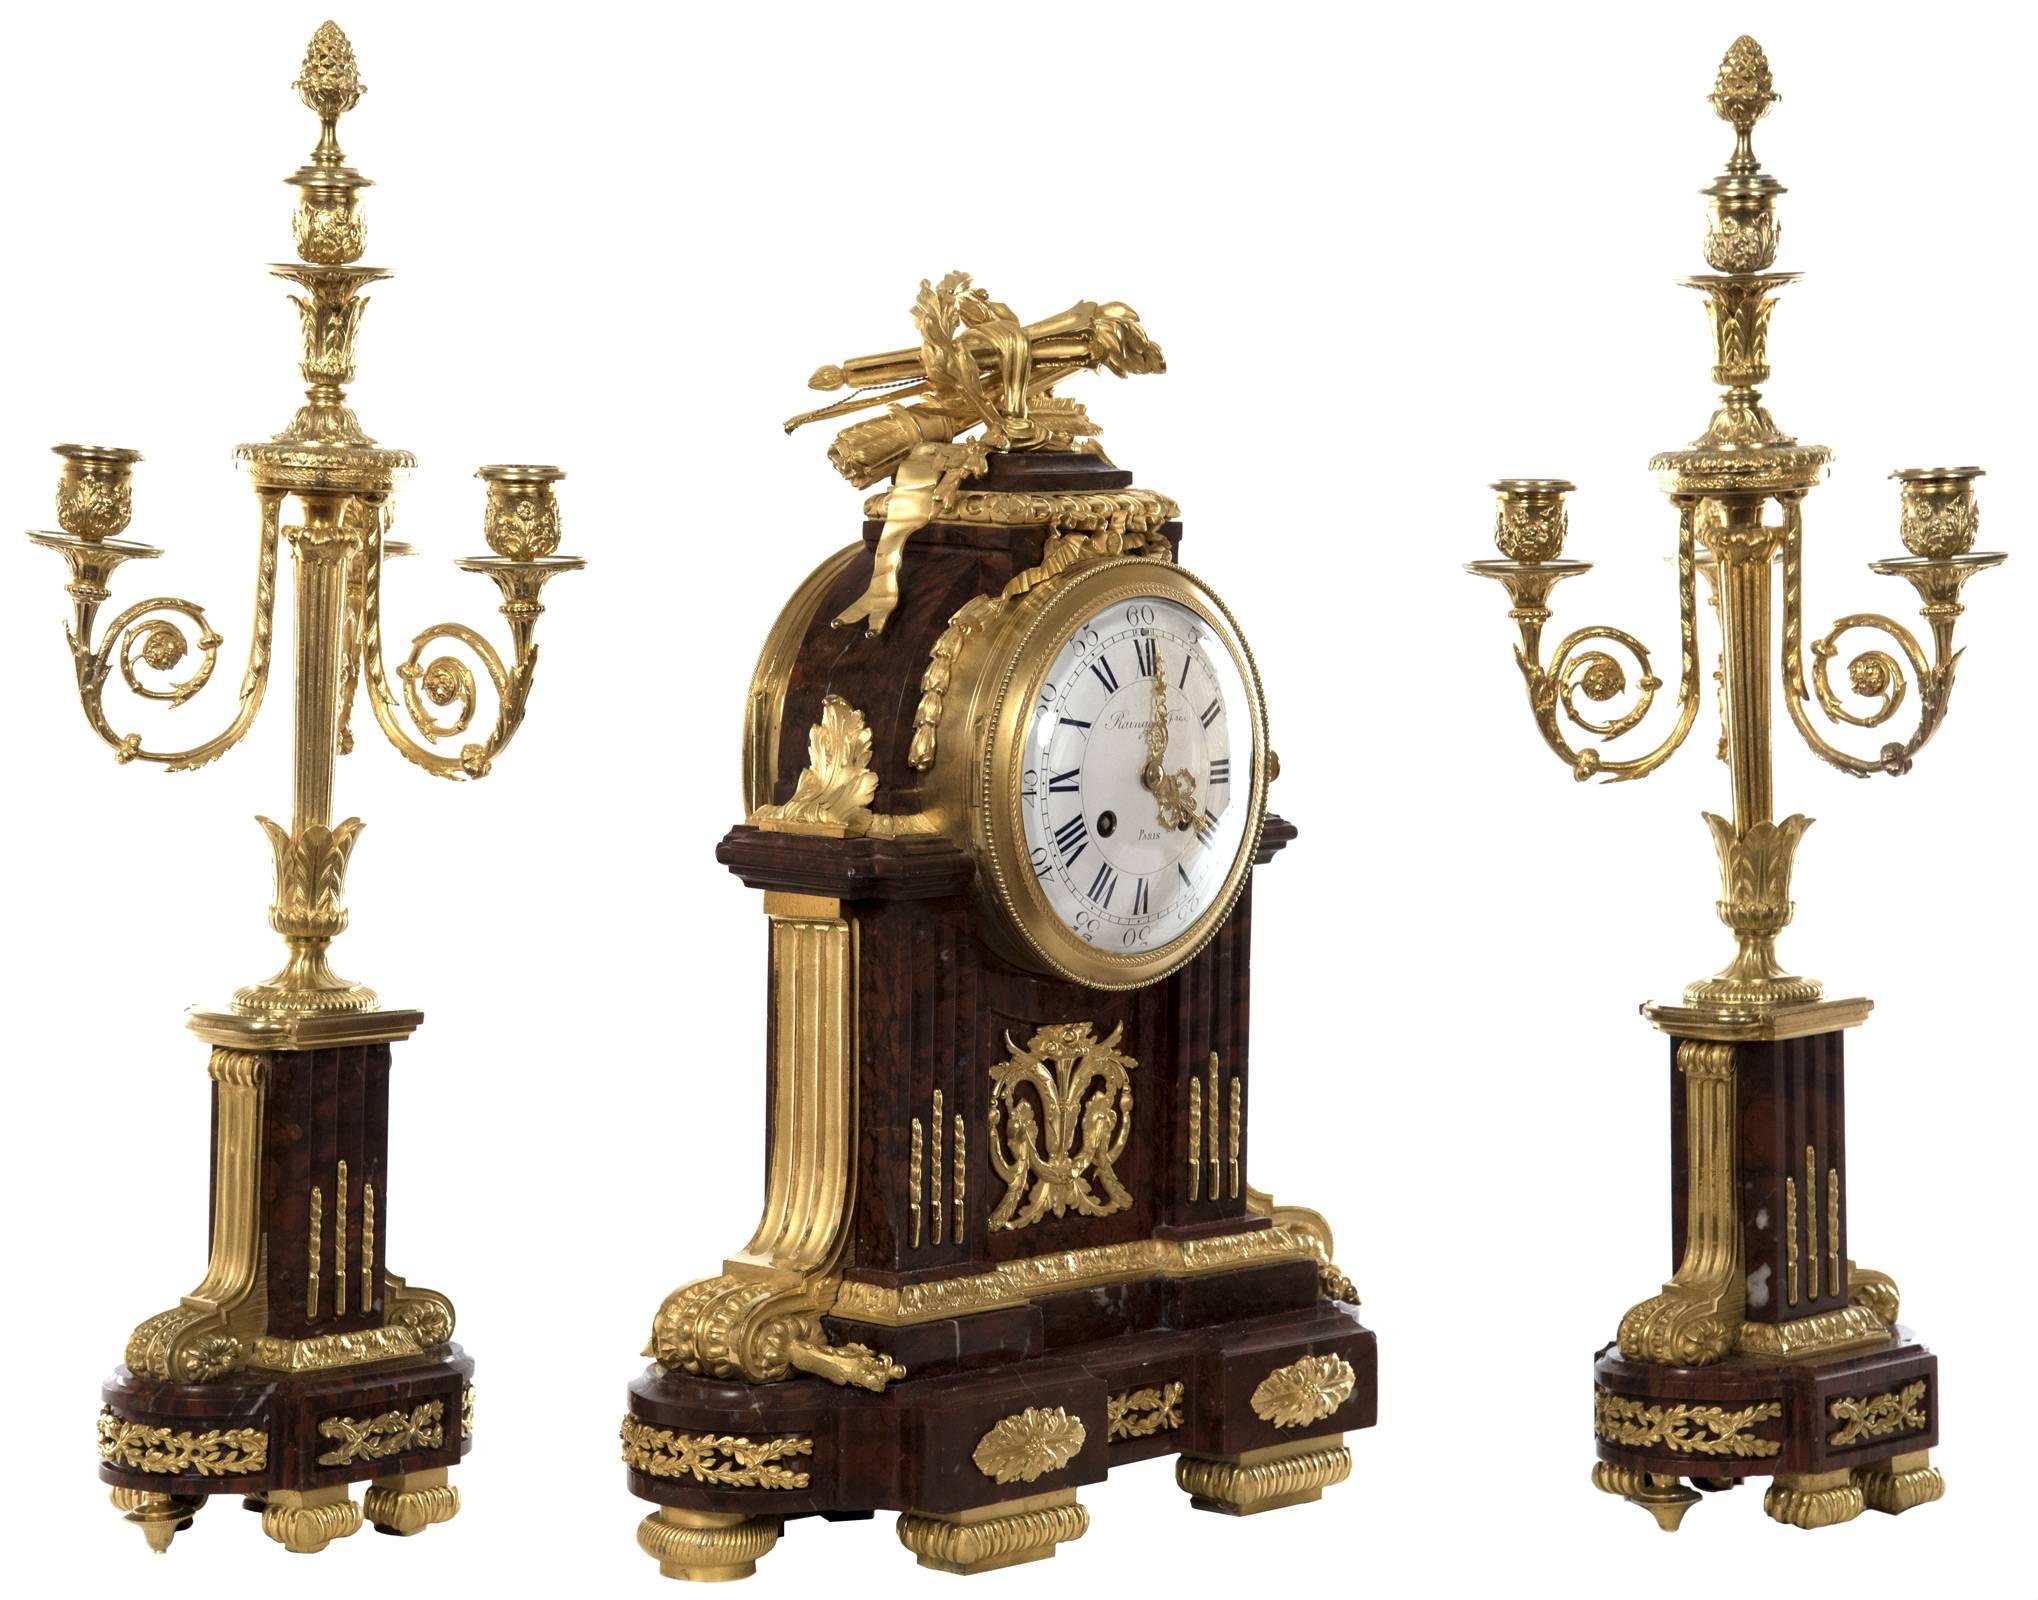 A red griotte marble and ormolu three-piece clock garniture by the clockmaker and bronzier Raingo Frères, dating from the late 19th century, comprising a mantel clock and a pair of four-light candelabra. The clock is of architectural form with